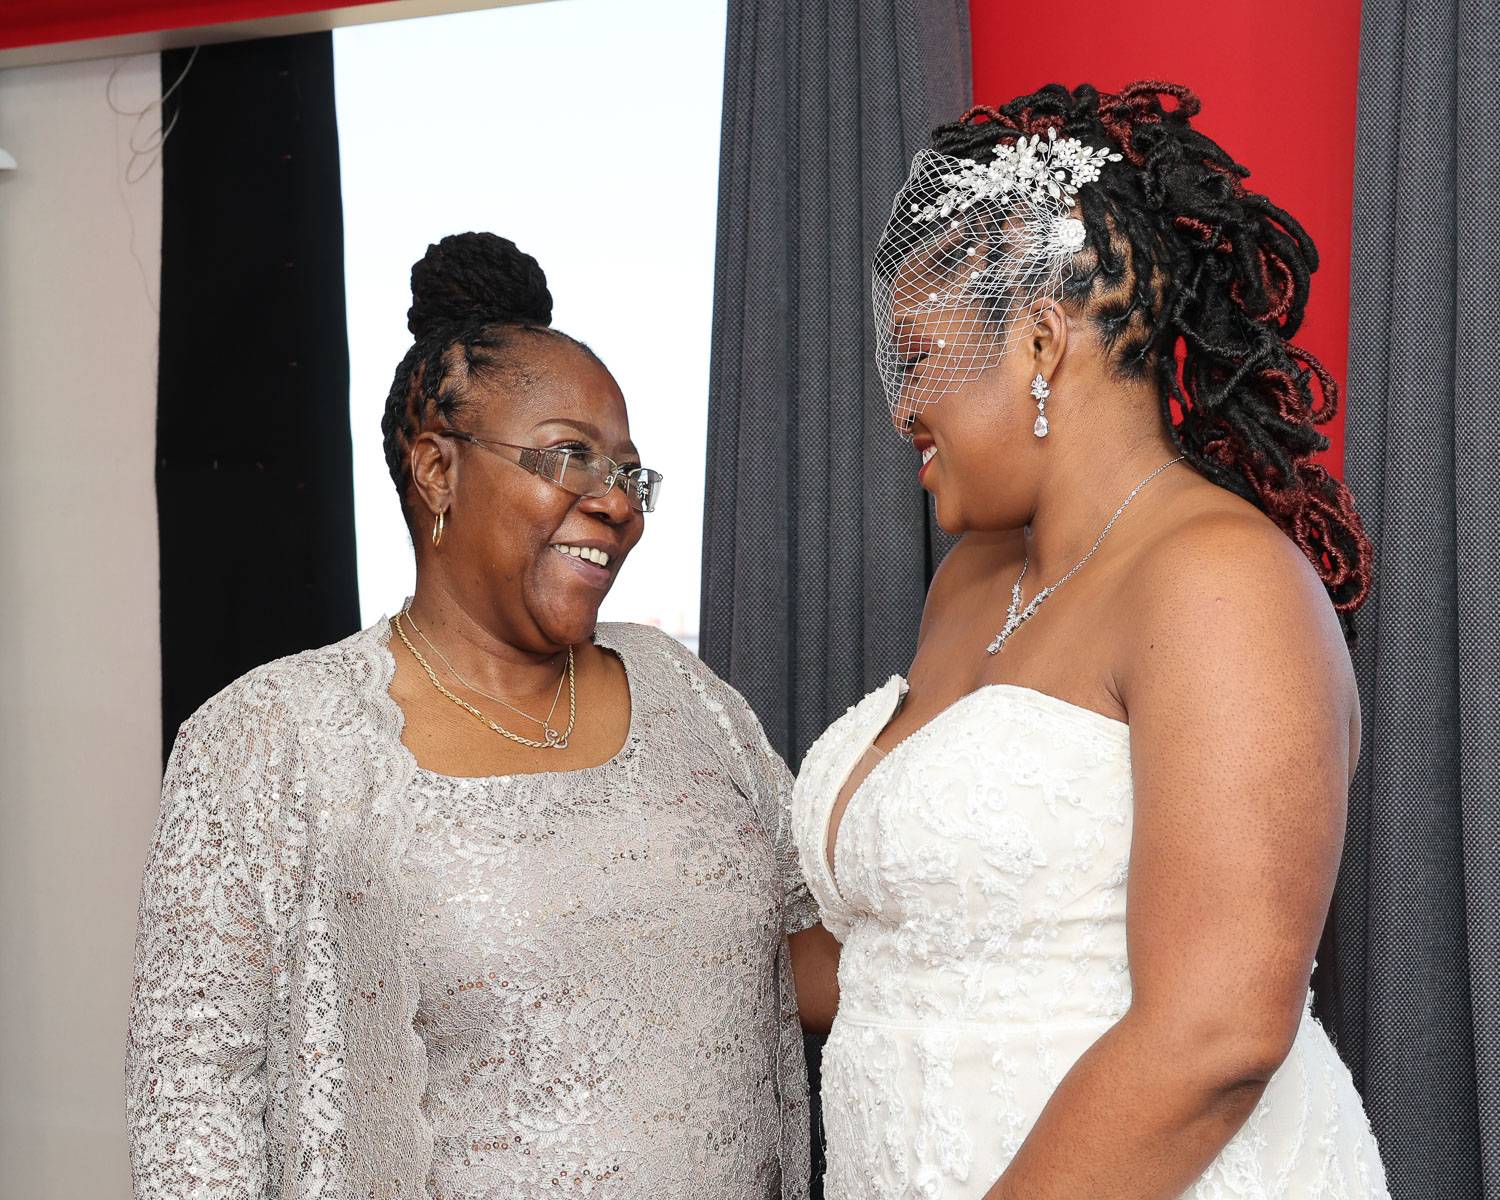 The bride and the woman smiling